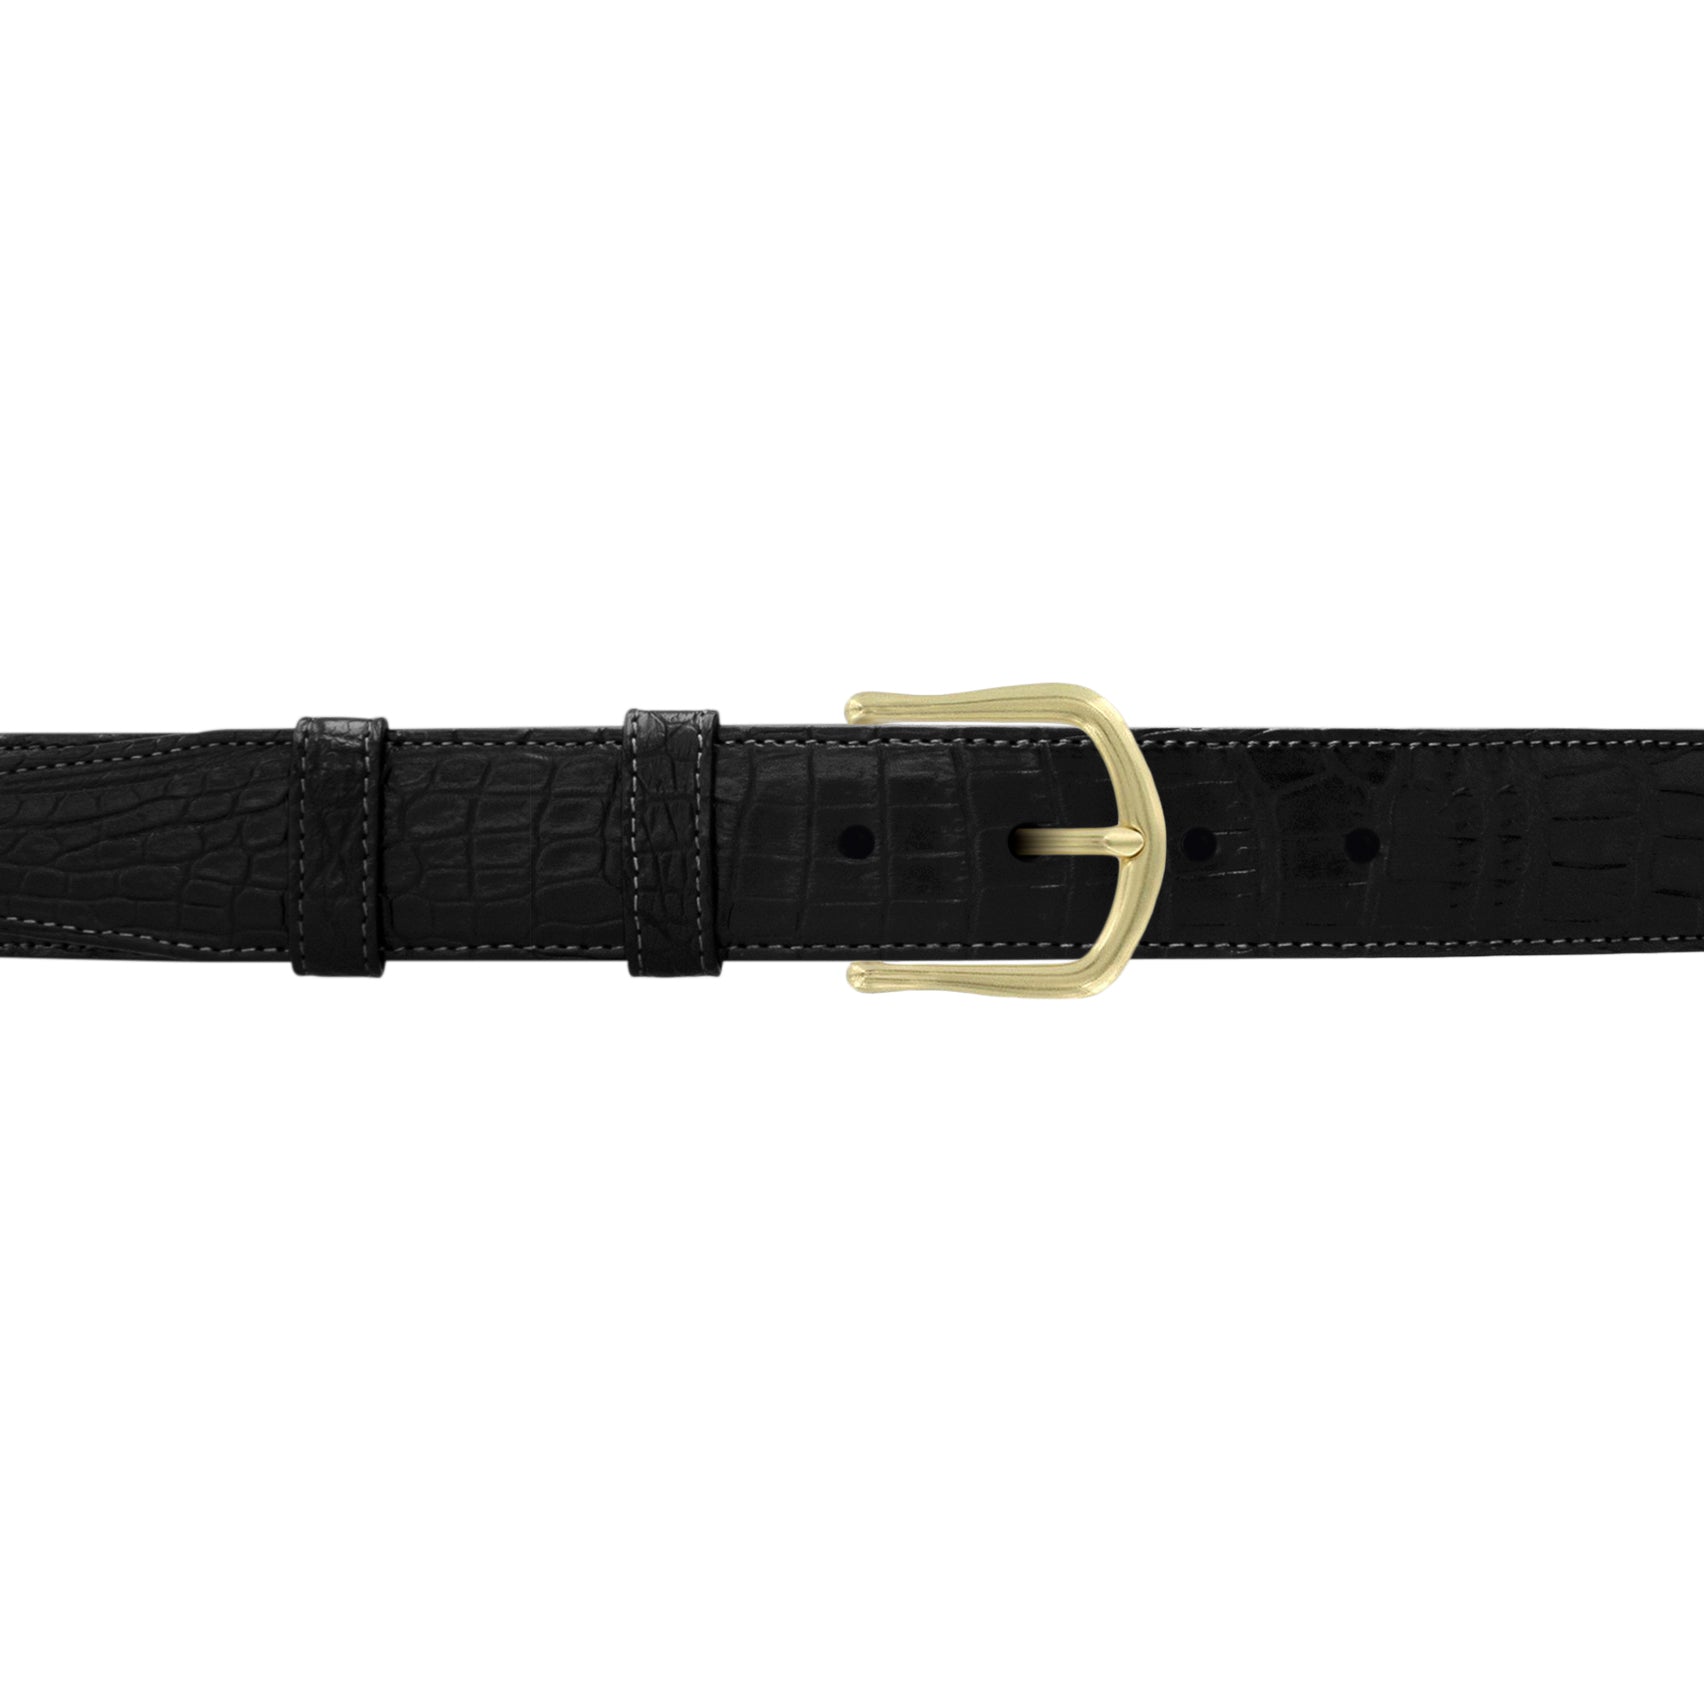 1 1/4" Raven Classic Belt with Derby Cocktail Buckle in Brass